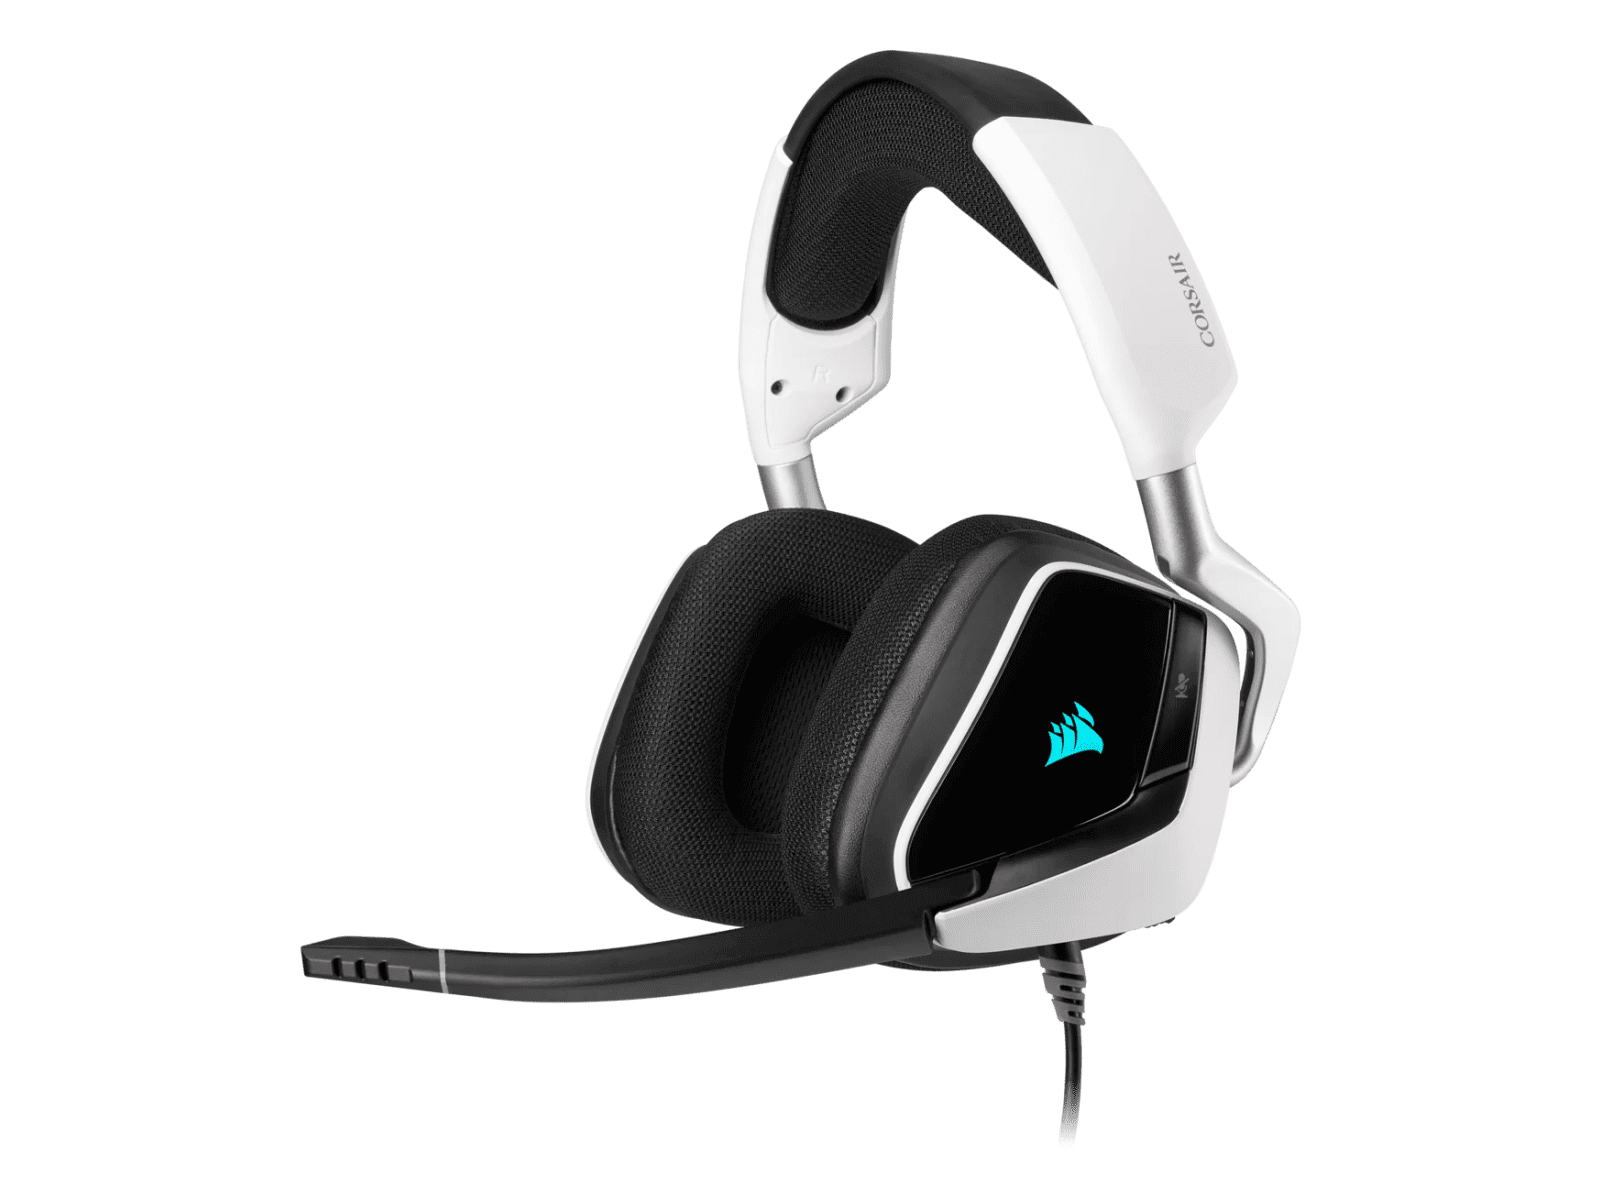 Picture of Corsair Void Elite Surround USB Gaming Headset with Dolby Headphone 7.1